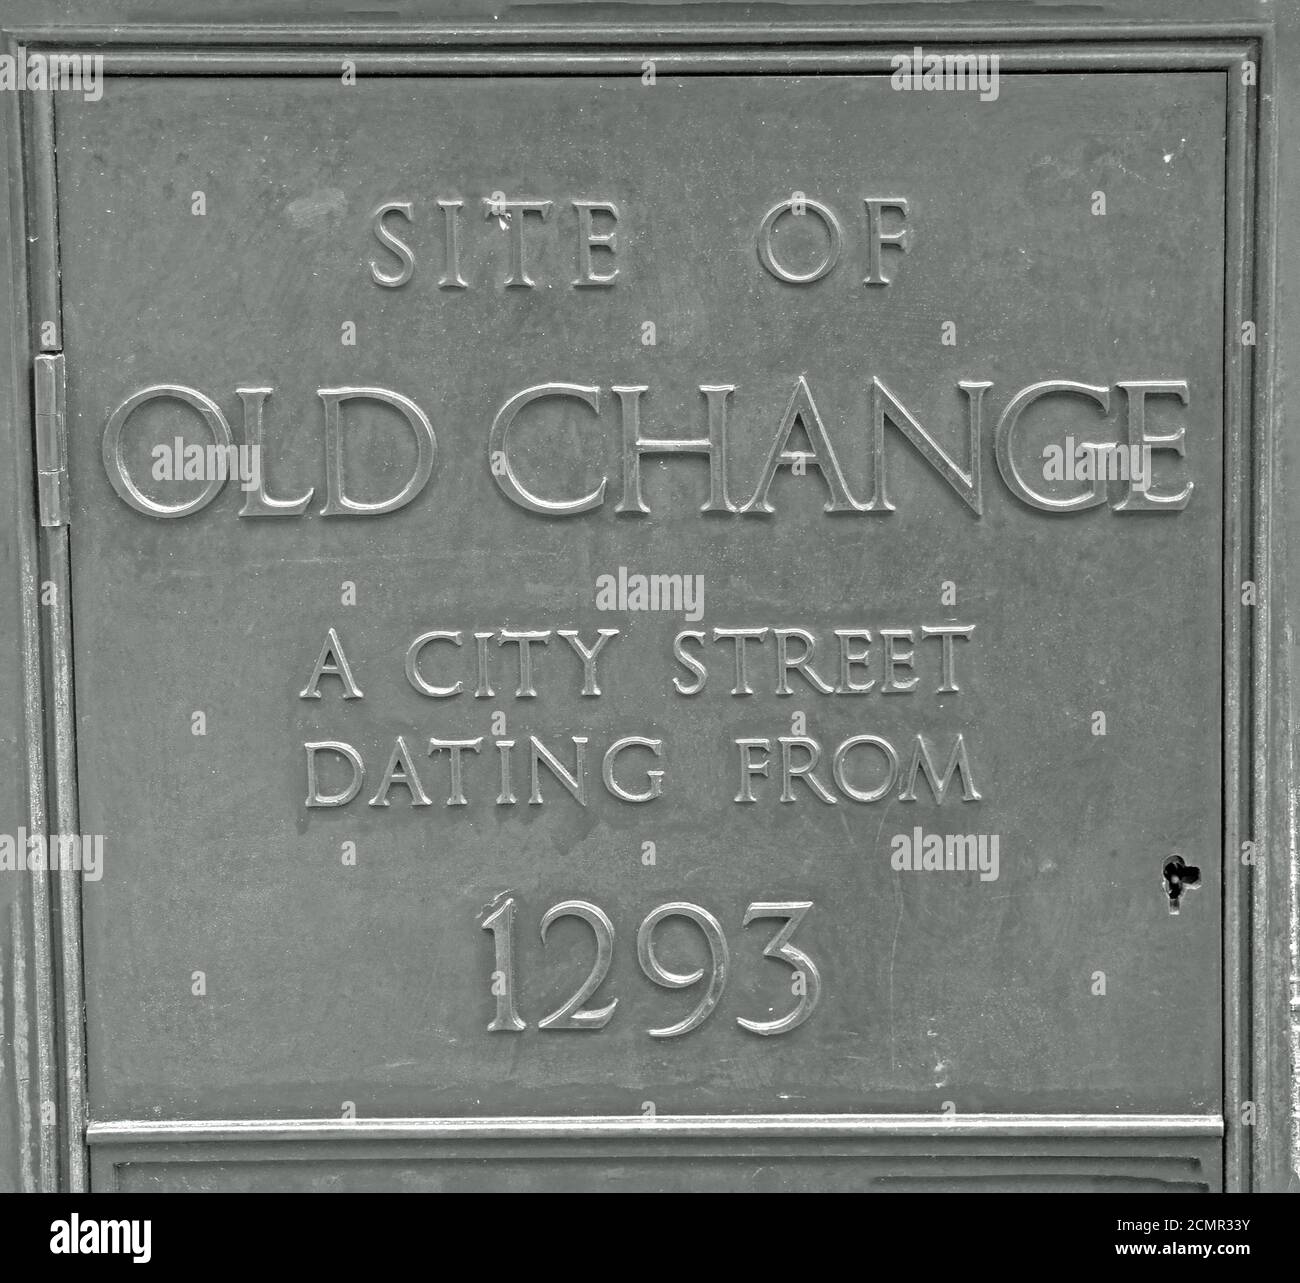 Old Change Plaque, London, 2018. Site of Old Change, a city street dating from 1293, located in St Paul's Churchyard, Festival Gardens Stock Photo